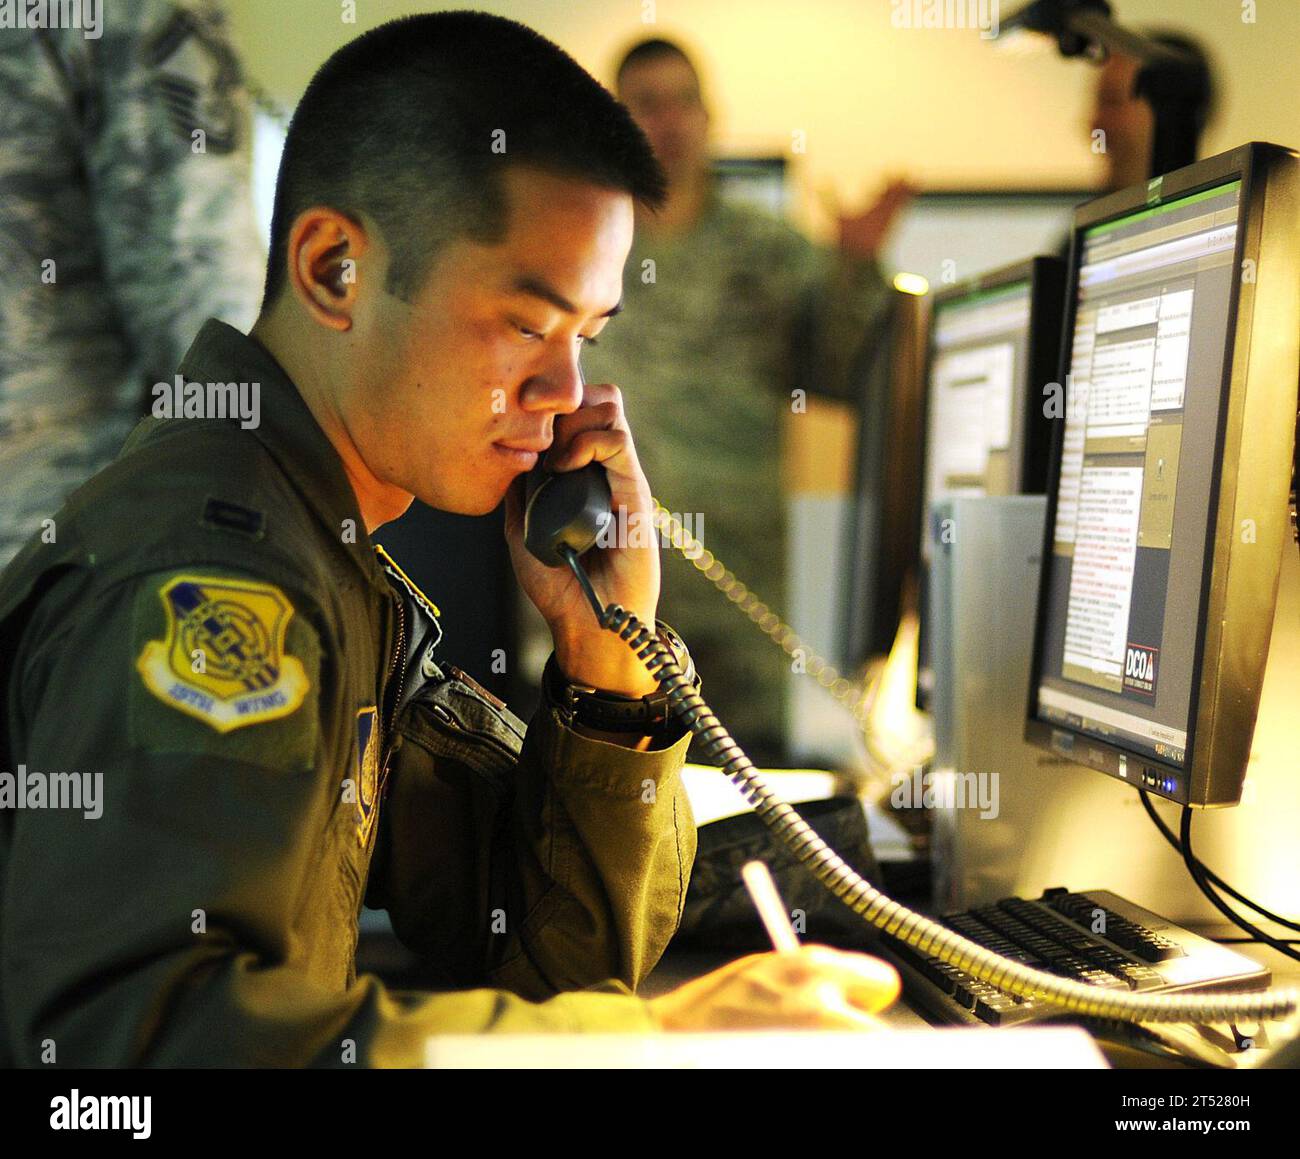 1011097498L-096 PEARL HARBOR (Nov. 9, 2010) Air Force Capt. Jon Ma, assigned to the 15th Wing Command Post, is the air operations representative at the Joint Base Pearl Harbor-Hickam Emergency Operation Center during a chemical, biological, radiological, nuclear and high-yield explosive exercise. Navy Stock Photo